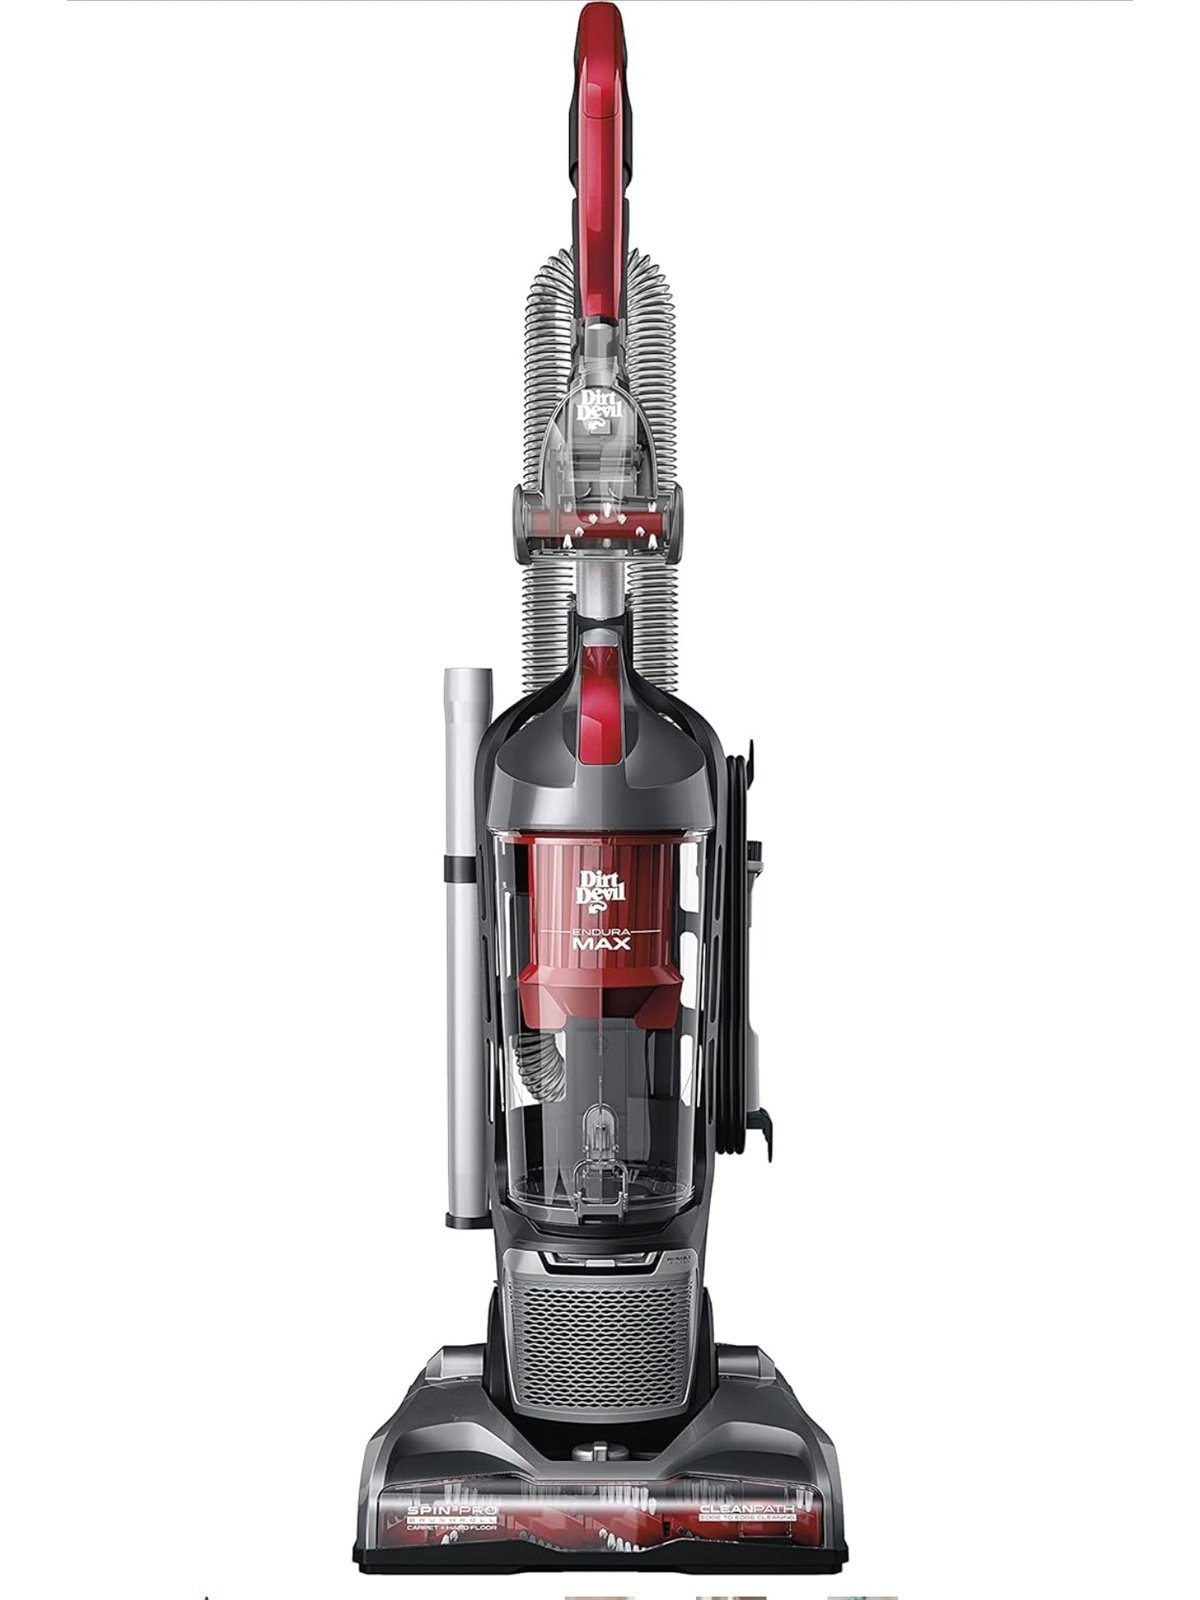 Dirt Devil Endura Max Upright Bagless Vacuum Cleaner for Carpet and Hard Floor, Powerful, Lightweight, Corded, UD70174B, Red